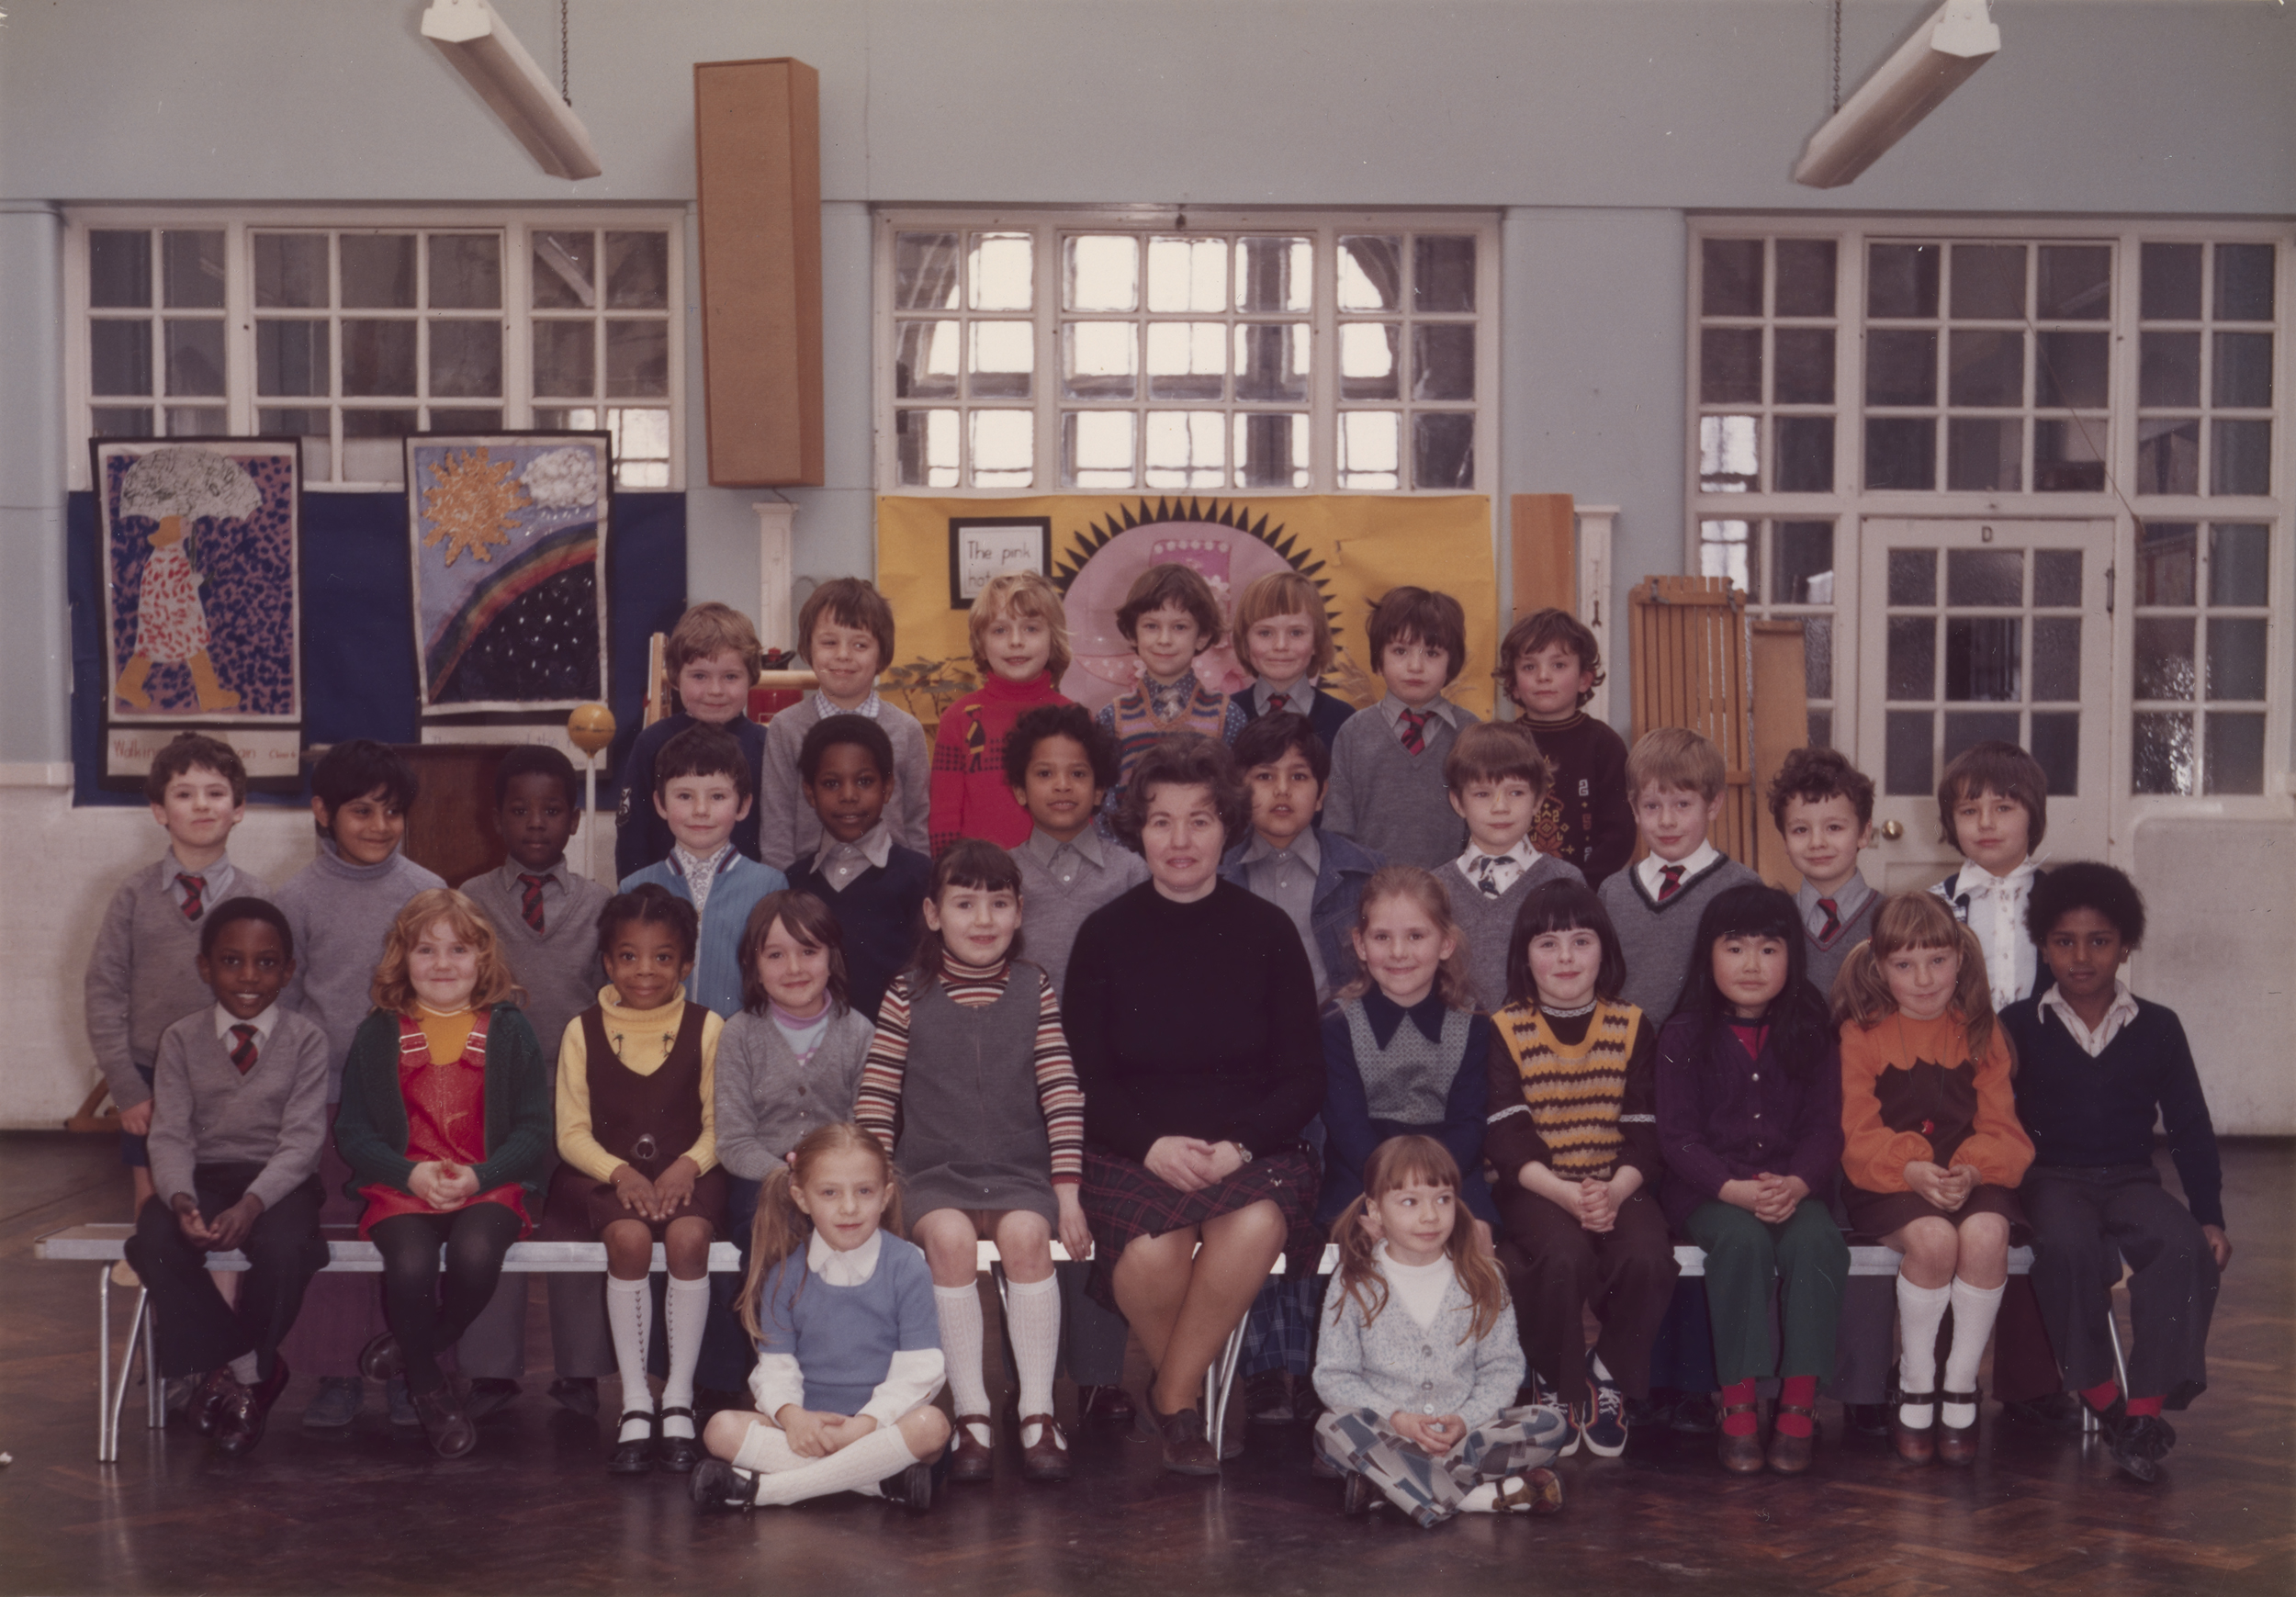 Steve McQueen’s Year 3 class at Little Ealing Primary School, 1977. (Every effort has been made to contact and gain approval from the individuals in this photograph. If you have any new information or are featured in the image, please contact pressoffice@tate.org.uk Steve McQueen is seated fifth from left in the middle row.    